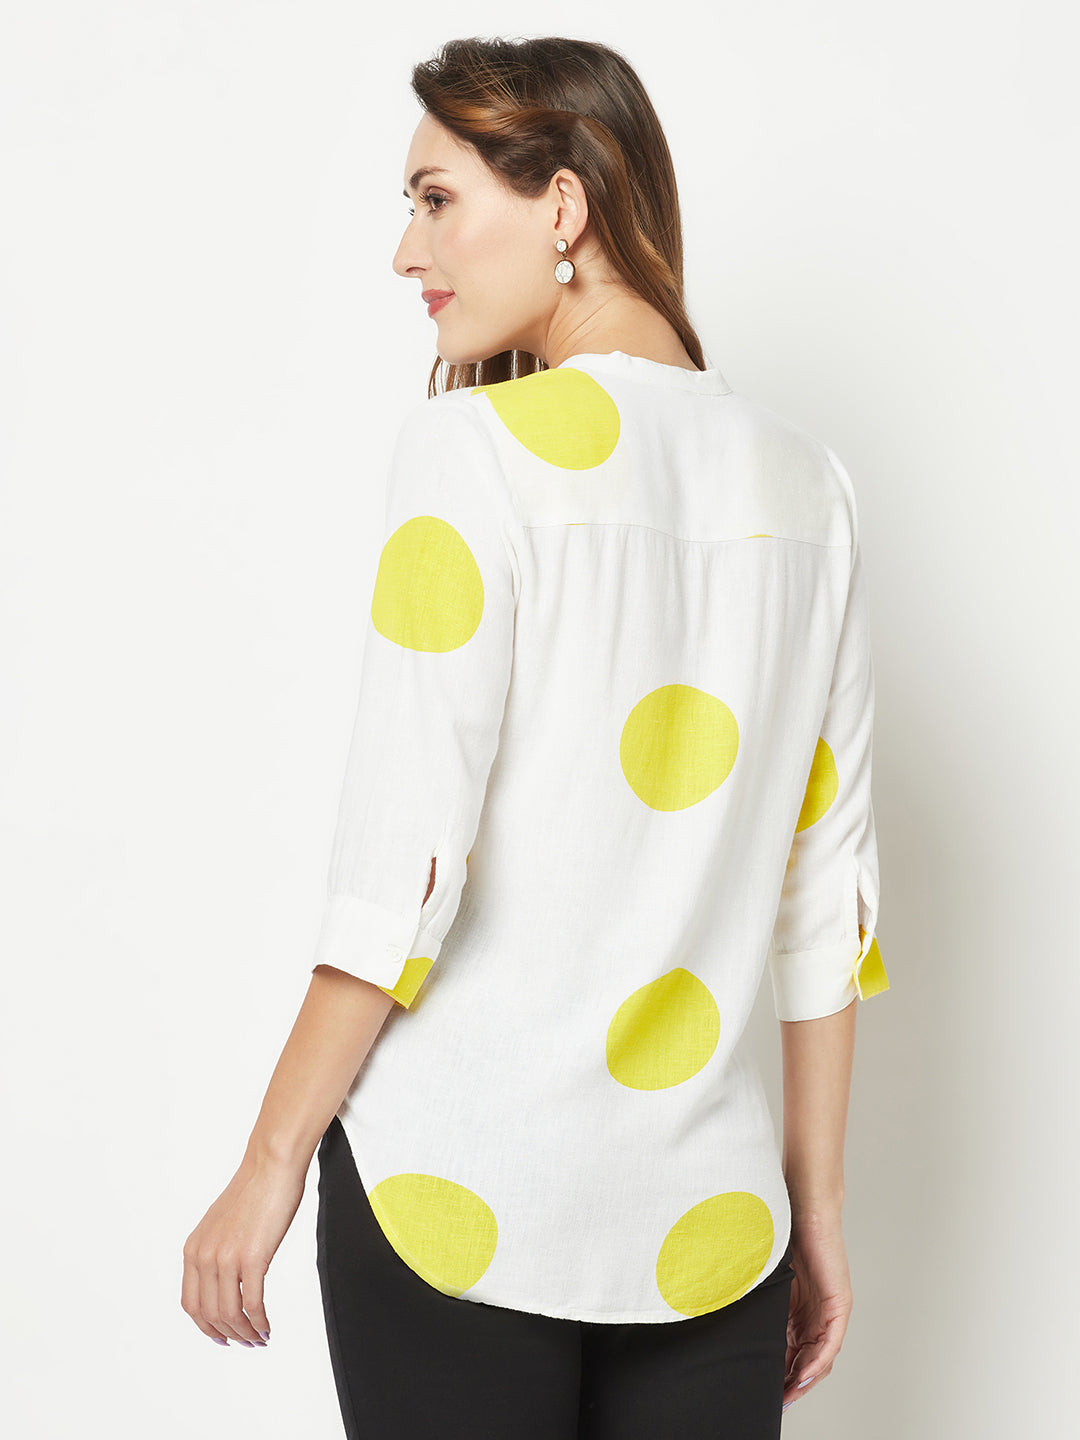  Yellow Polka-Dotted Top